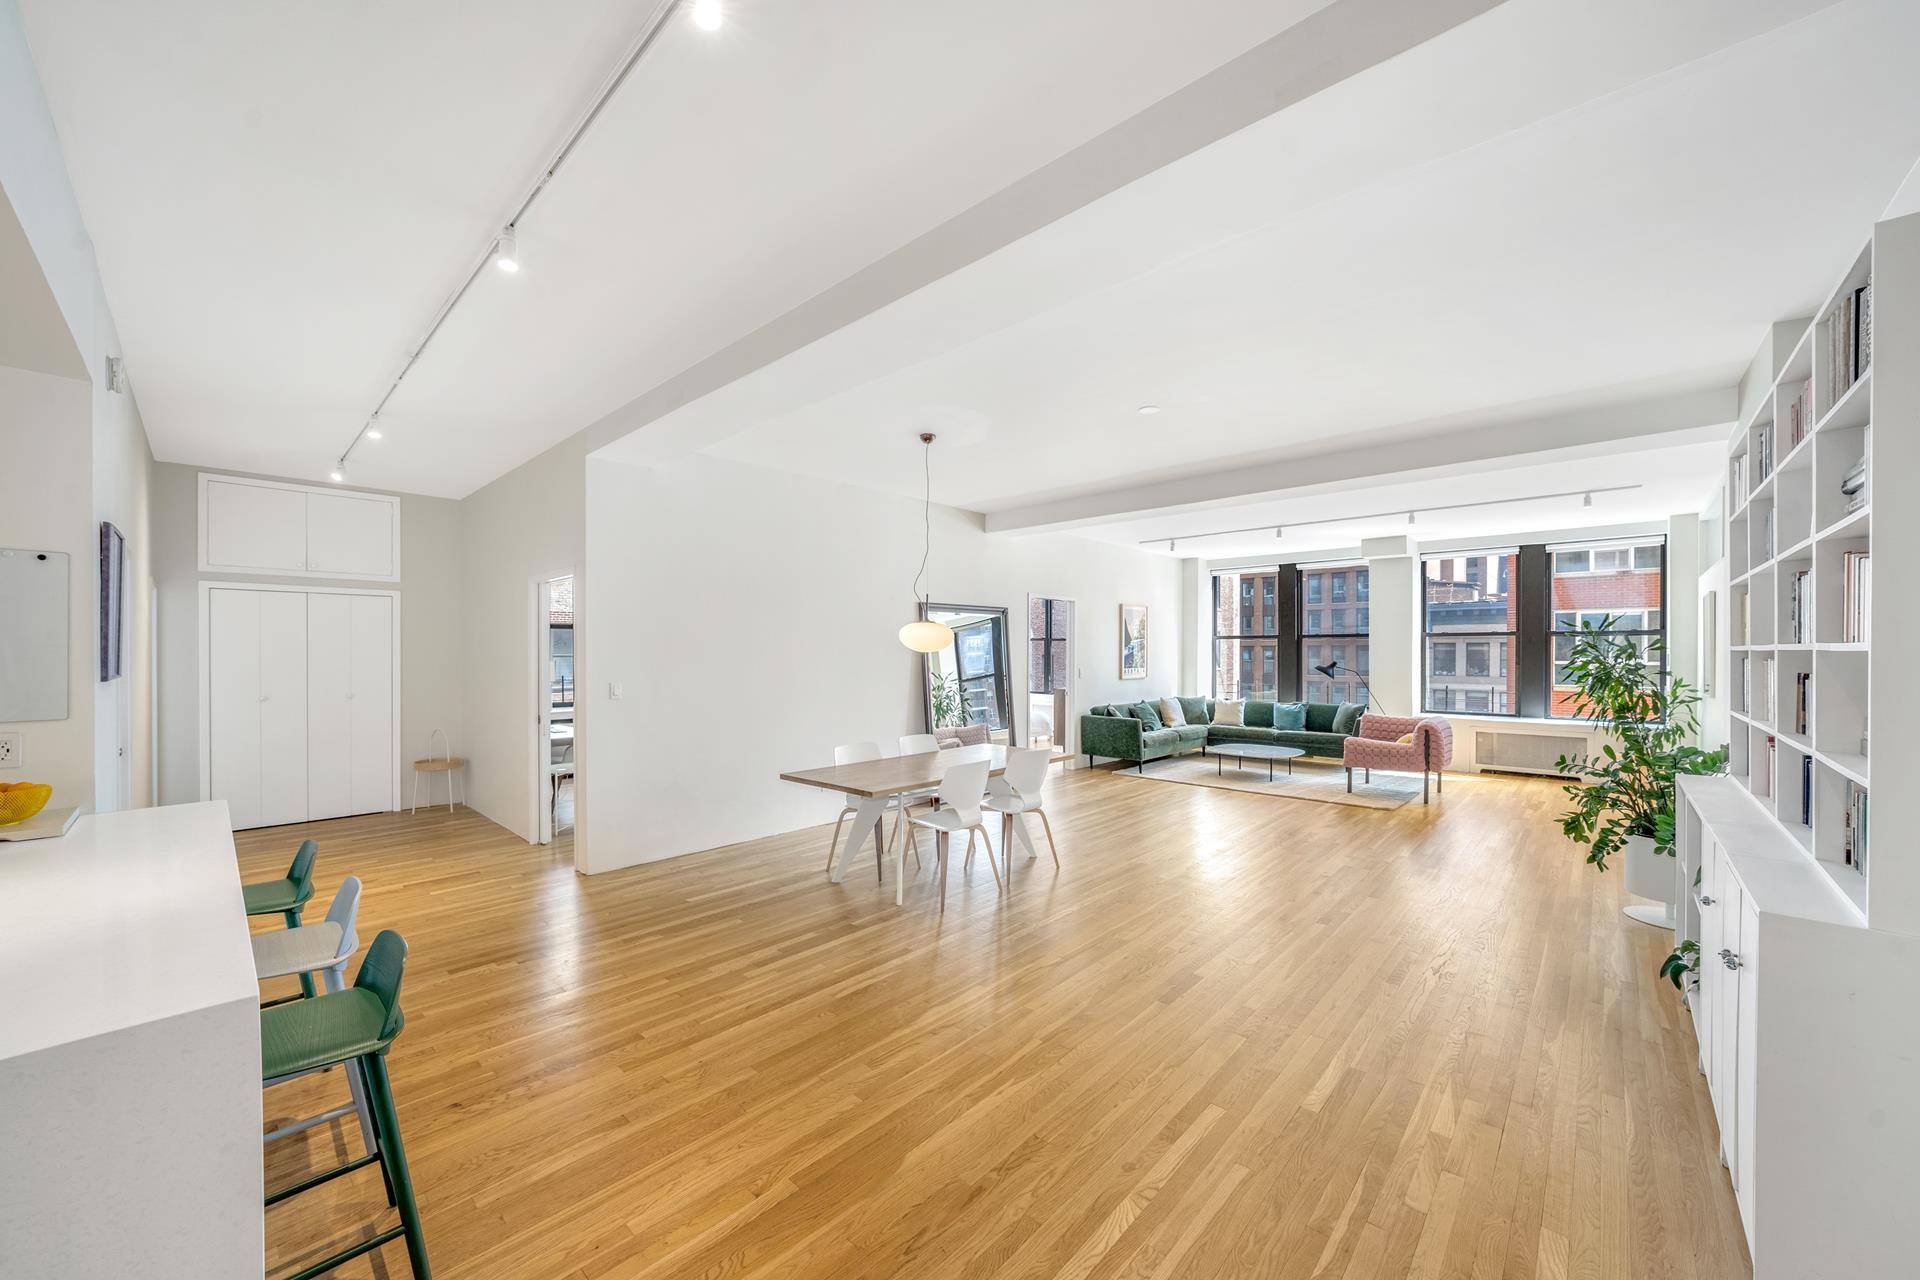 Text 252 W 30th St, 6B Apartment 6B is an exceptional live work corner loft graced with a profusion of natural light pouring through 17 large windows and a south ...